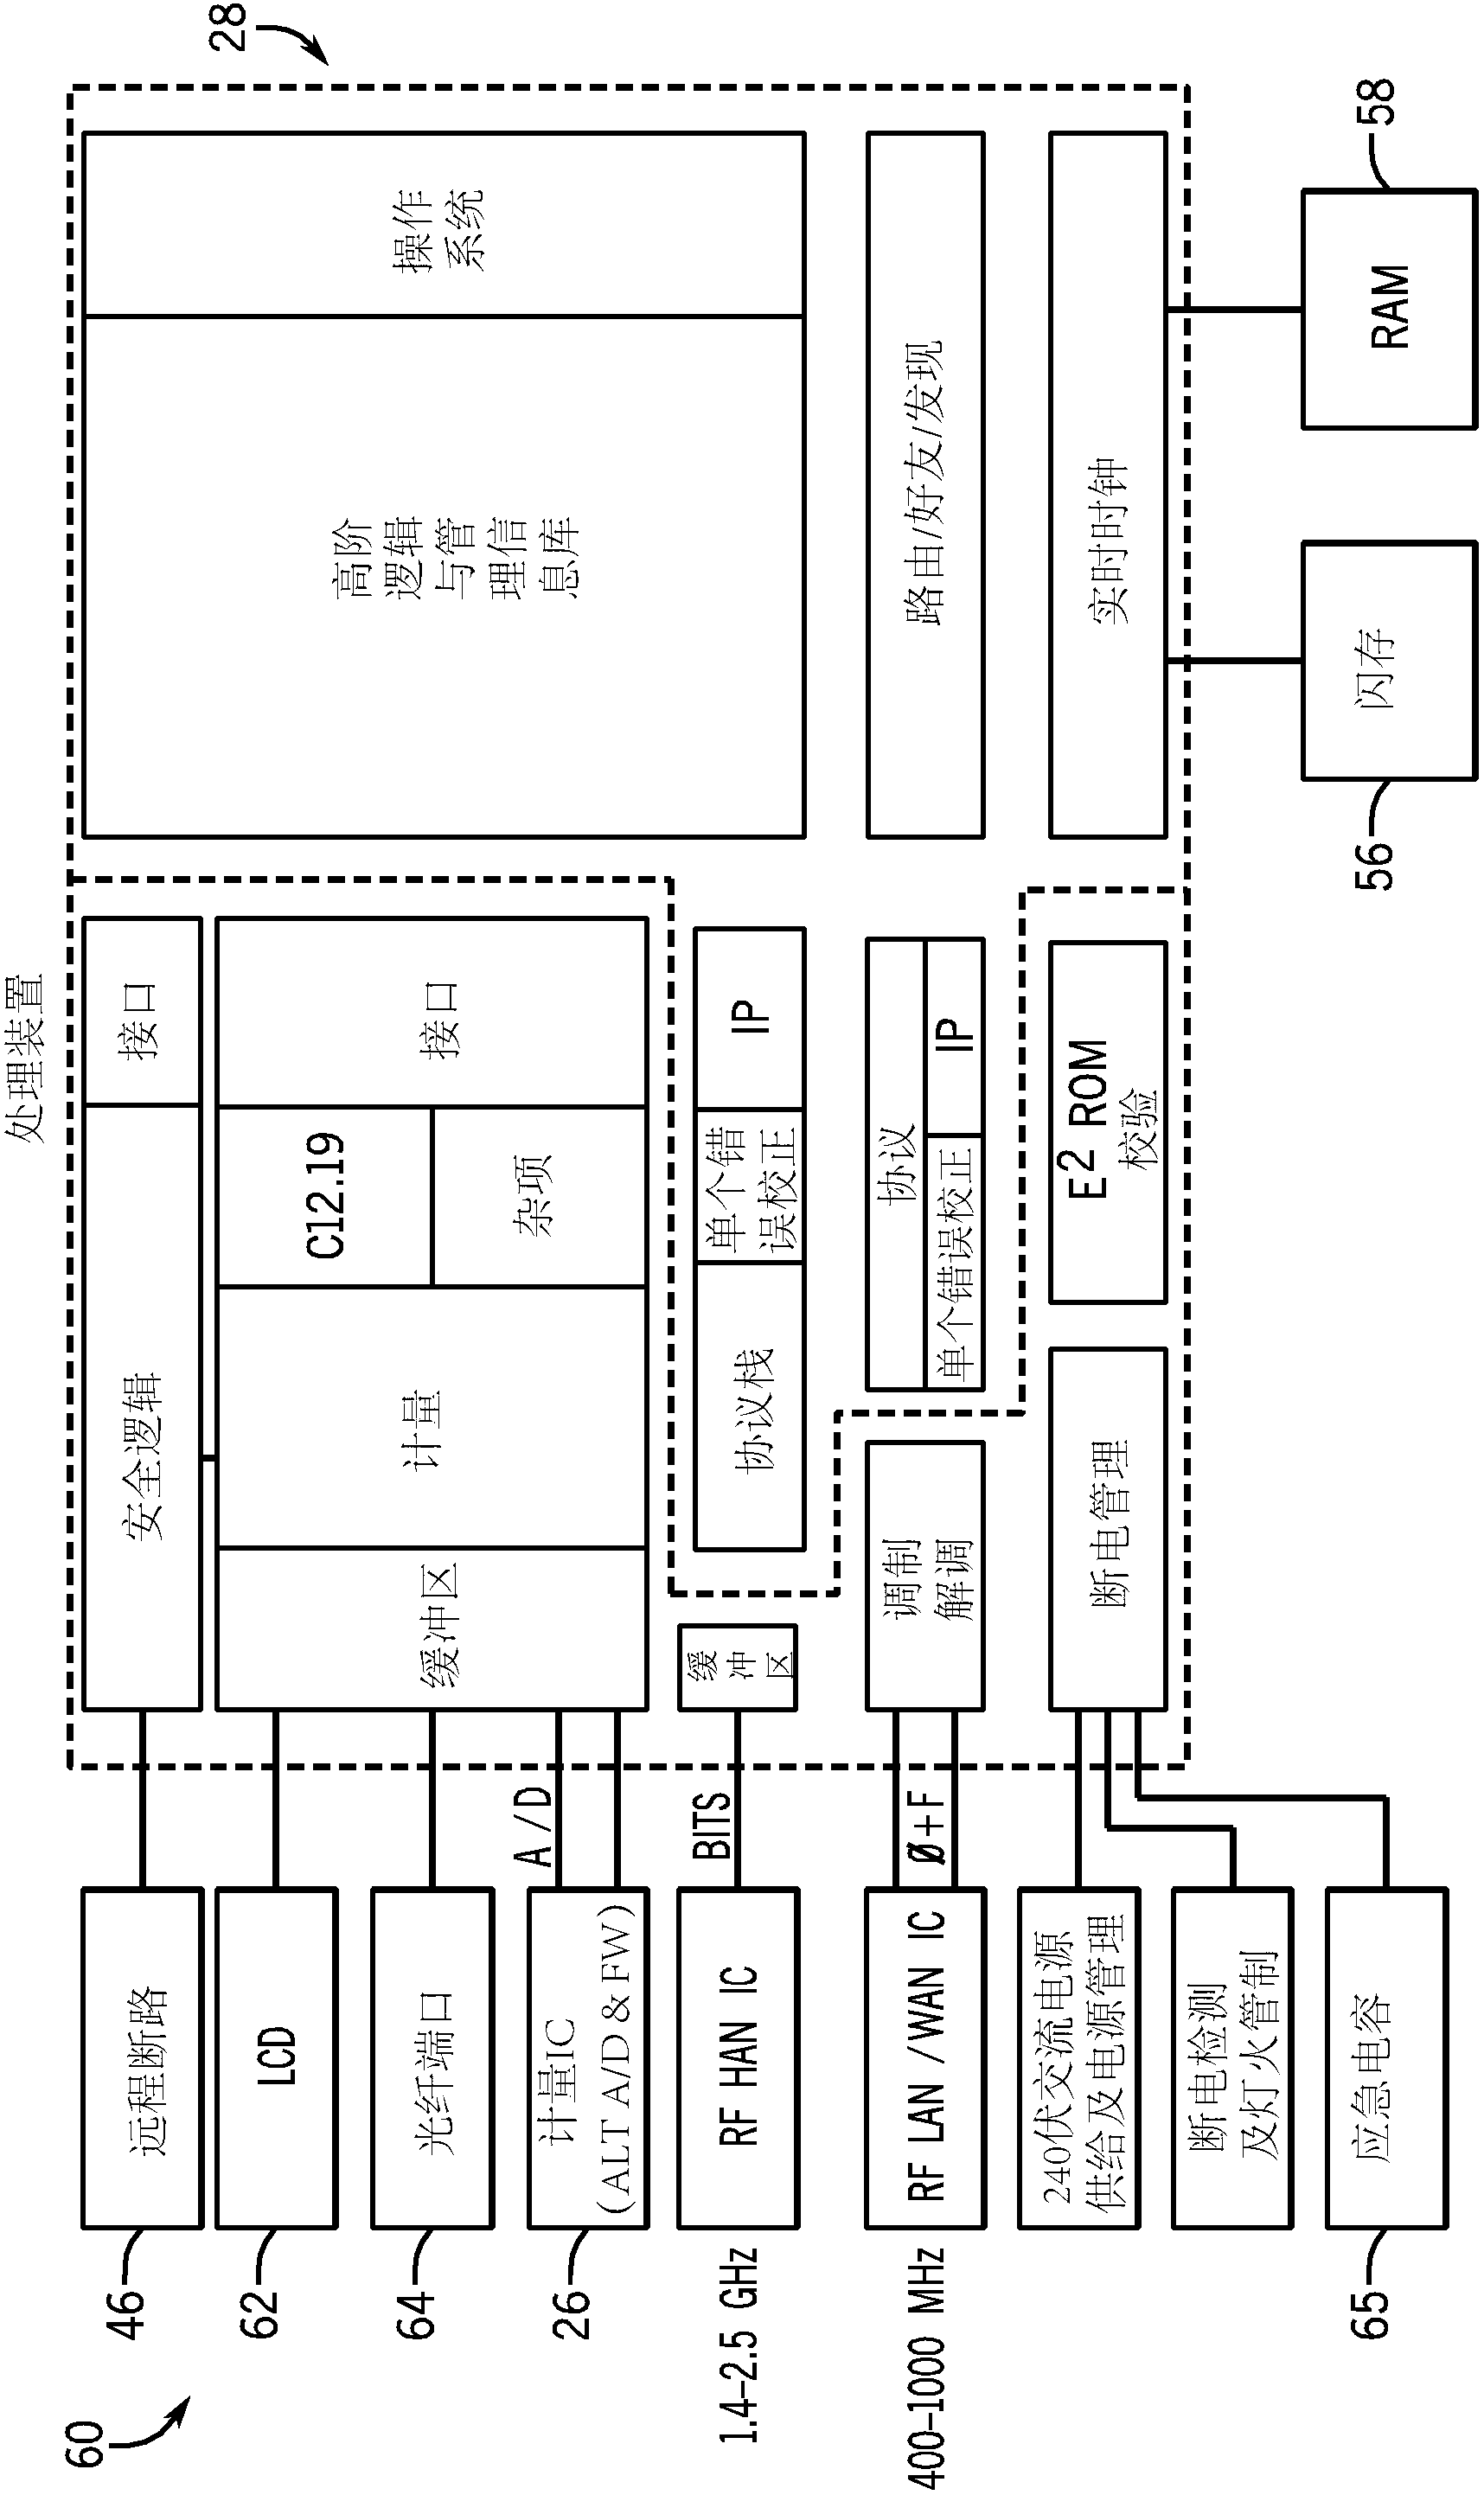 Electric utility meter comprising load identifying data processor